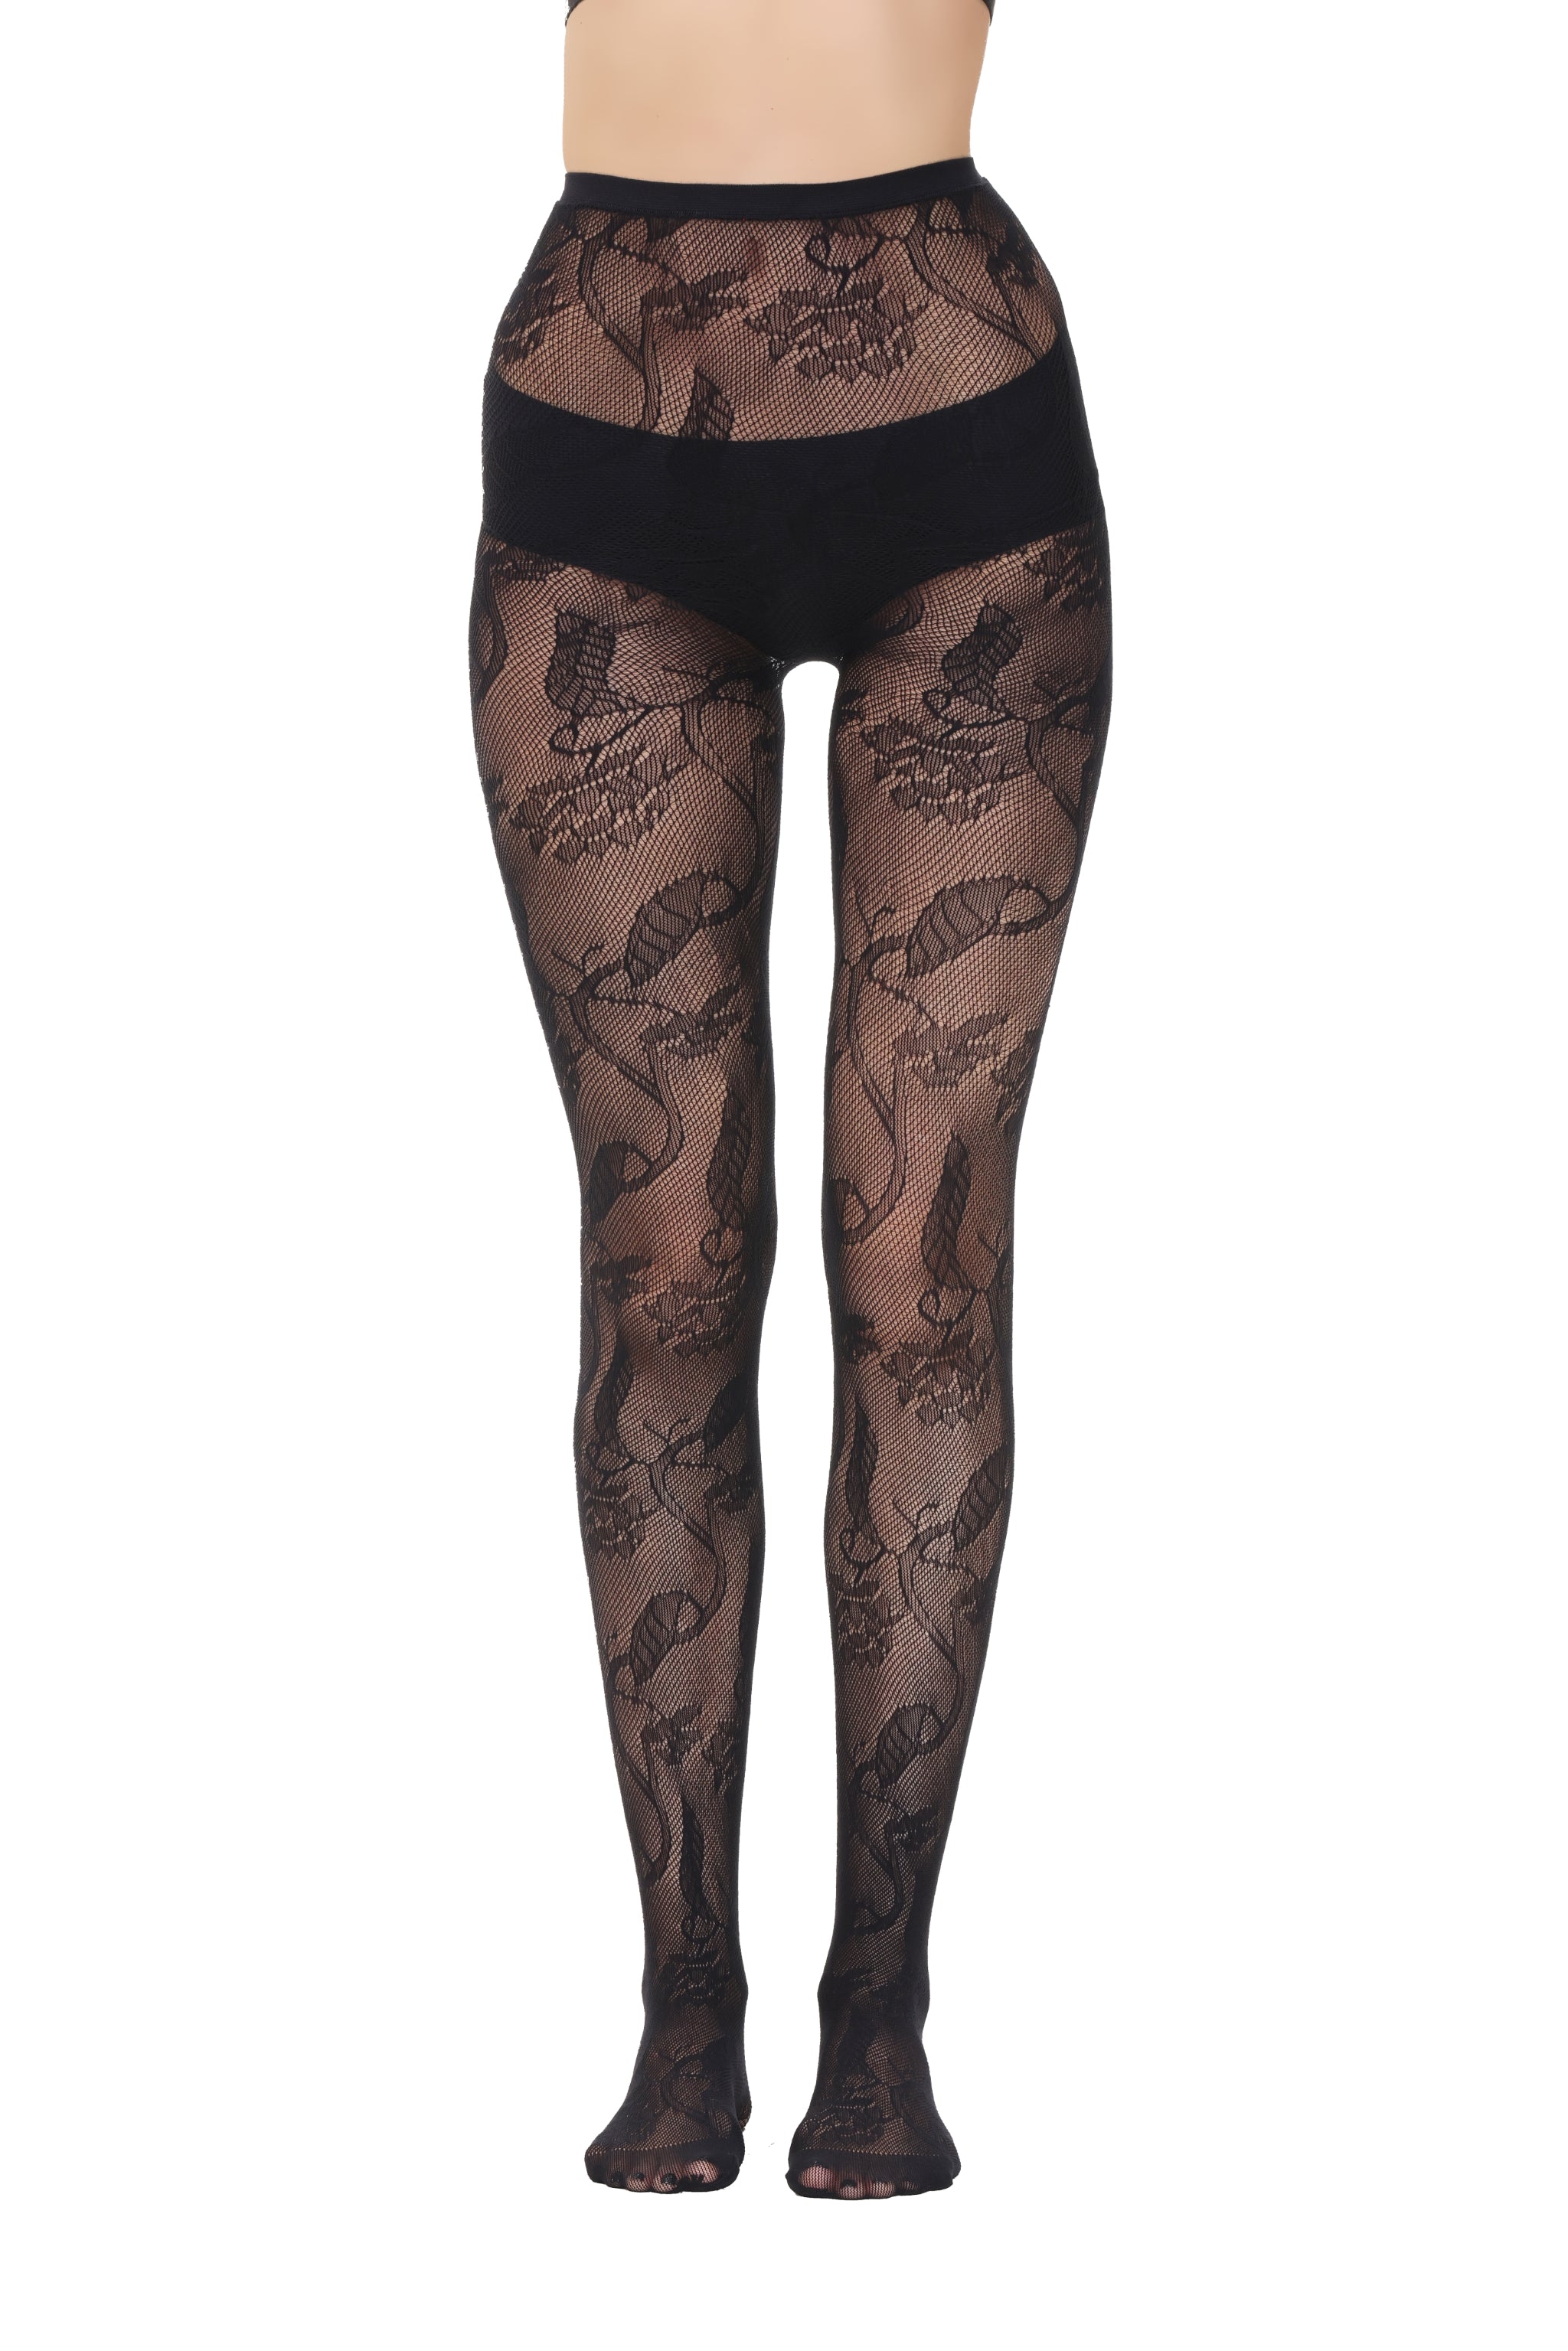 Fishnet Tights 110921 Front